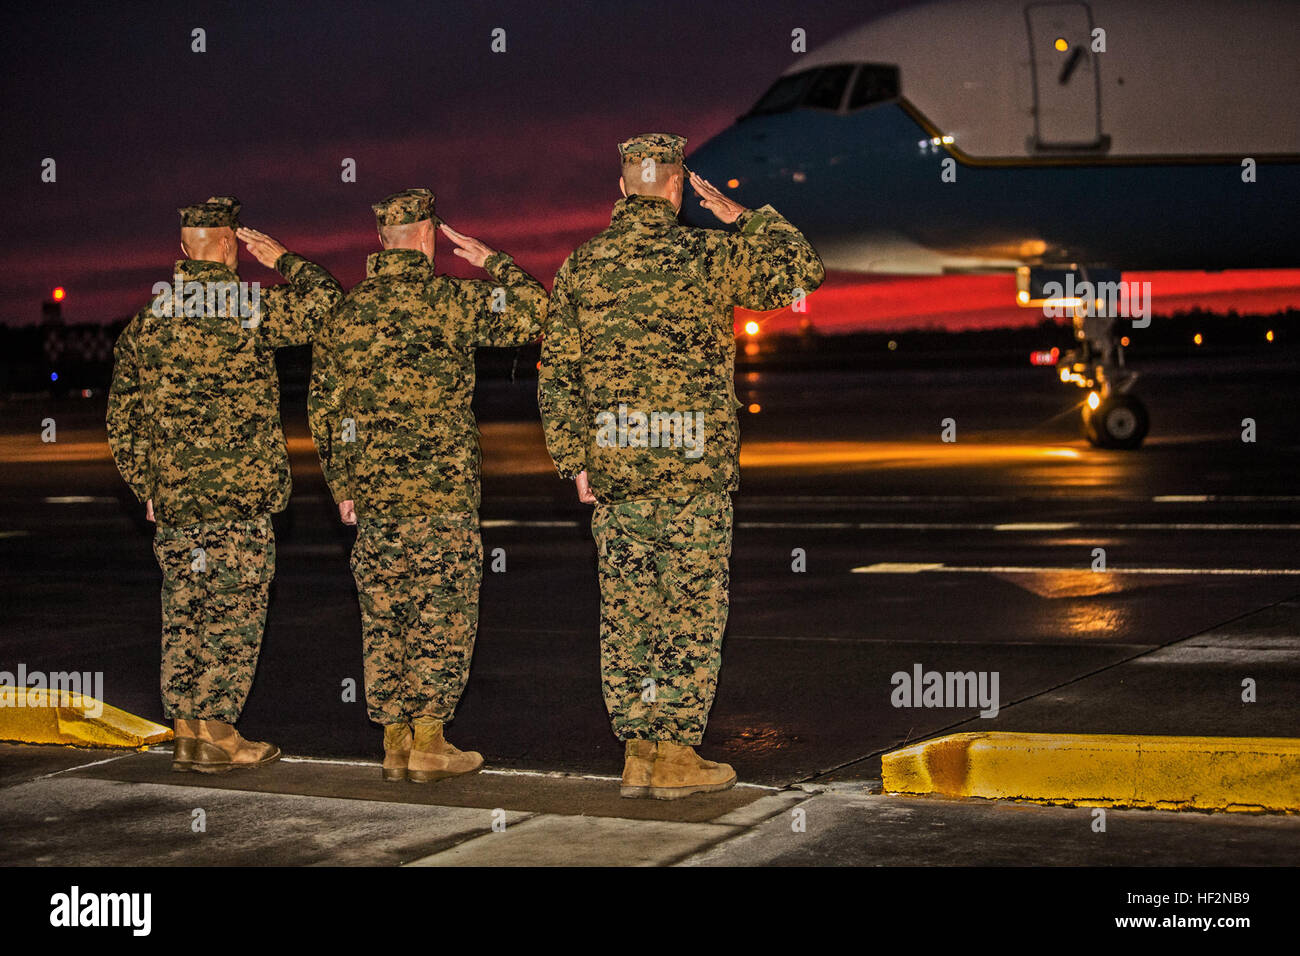 From left to right, U.S. Marine Corps Col. Matthew G. St. Clair, SgtMaj. Bryan K. Zickefoose, and Maj. Gen. William D. Beydler, salute the arriving plane of the U.S. Secretary of Defense, the Honorable Mr. Chuck Hagel, at Marine Corps Air Station New River, N.C., Nov. 17, 2014. Hagel visited Camp Lejeune as part of his tour of military installations across the country. (U.S. Marine Corps photo by Cpl. Desire M. Mora/Released) US Secretary of Defense, The Honorable Mr. Chuck Hagel, arrives for visit to Marine Corps Base Camp Lejeune, NC 141117-M-TG562-001 Stock Photo